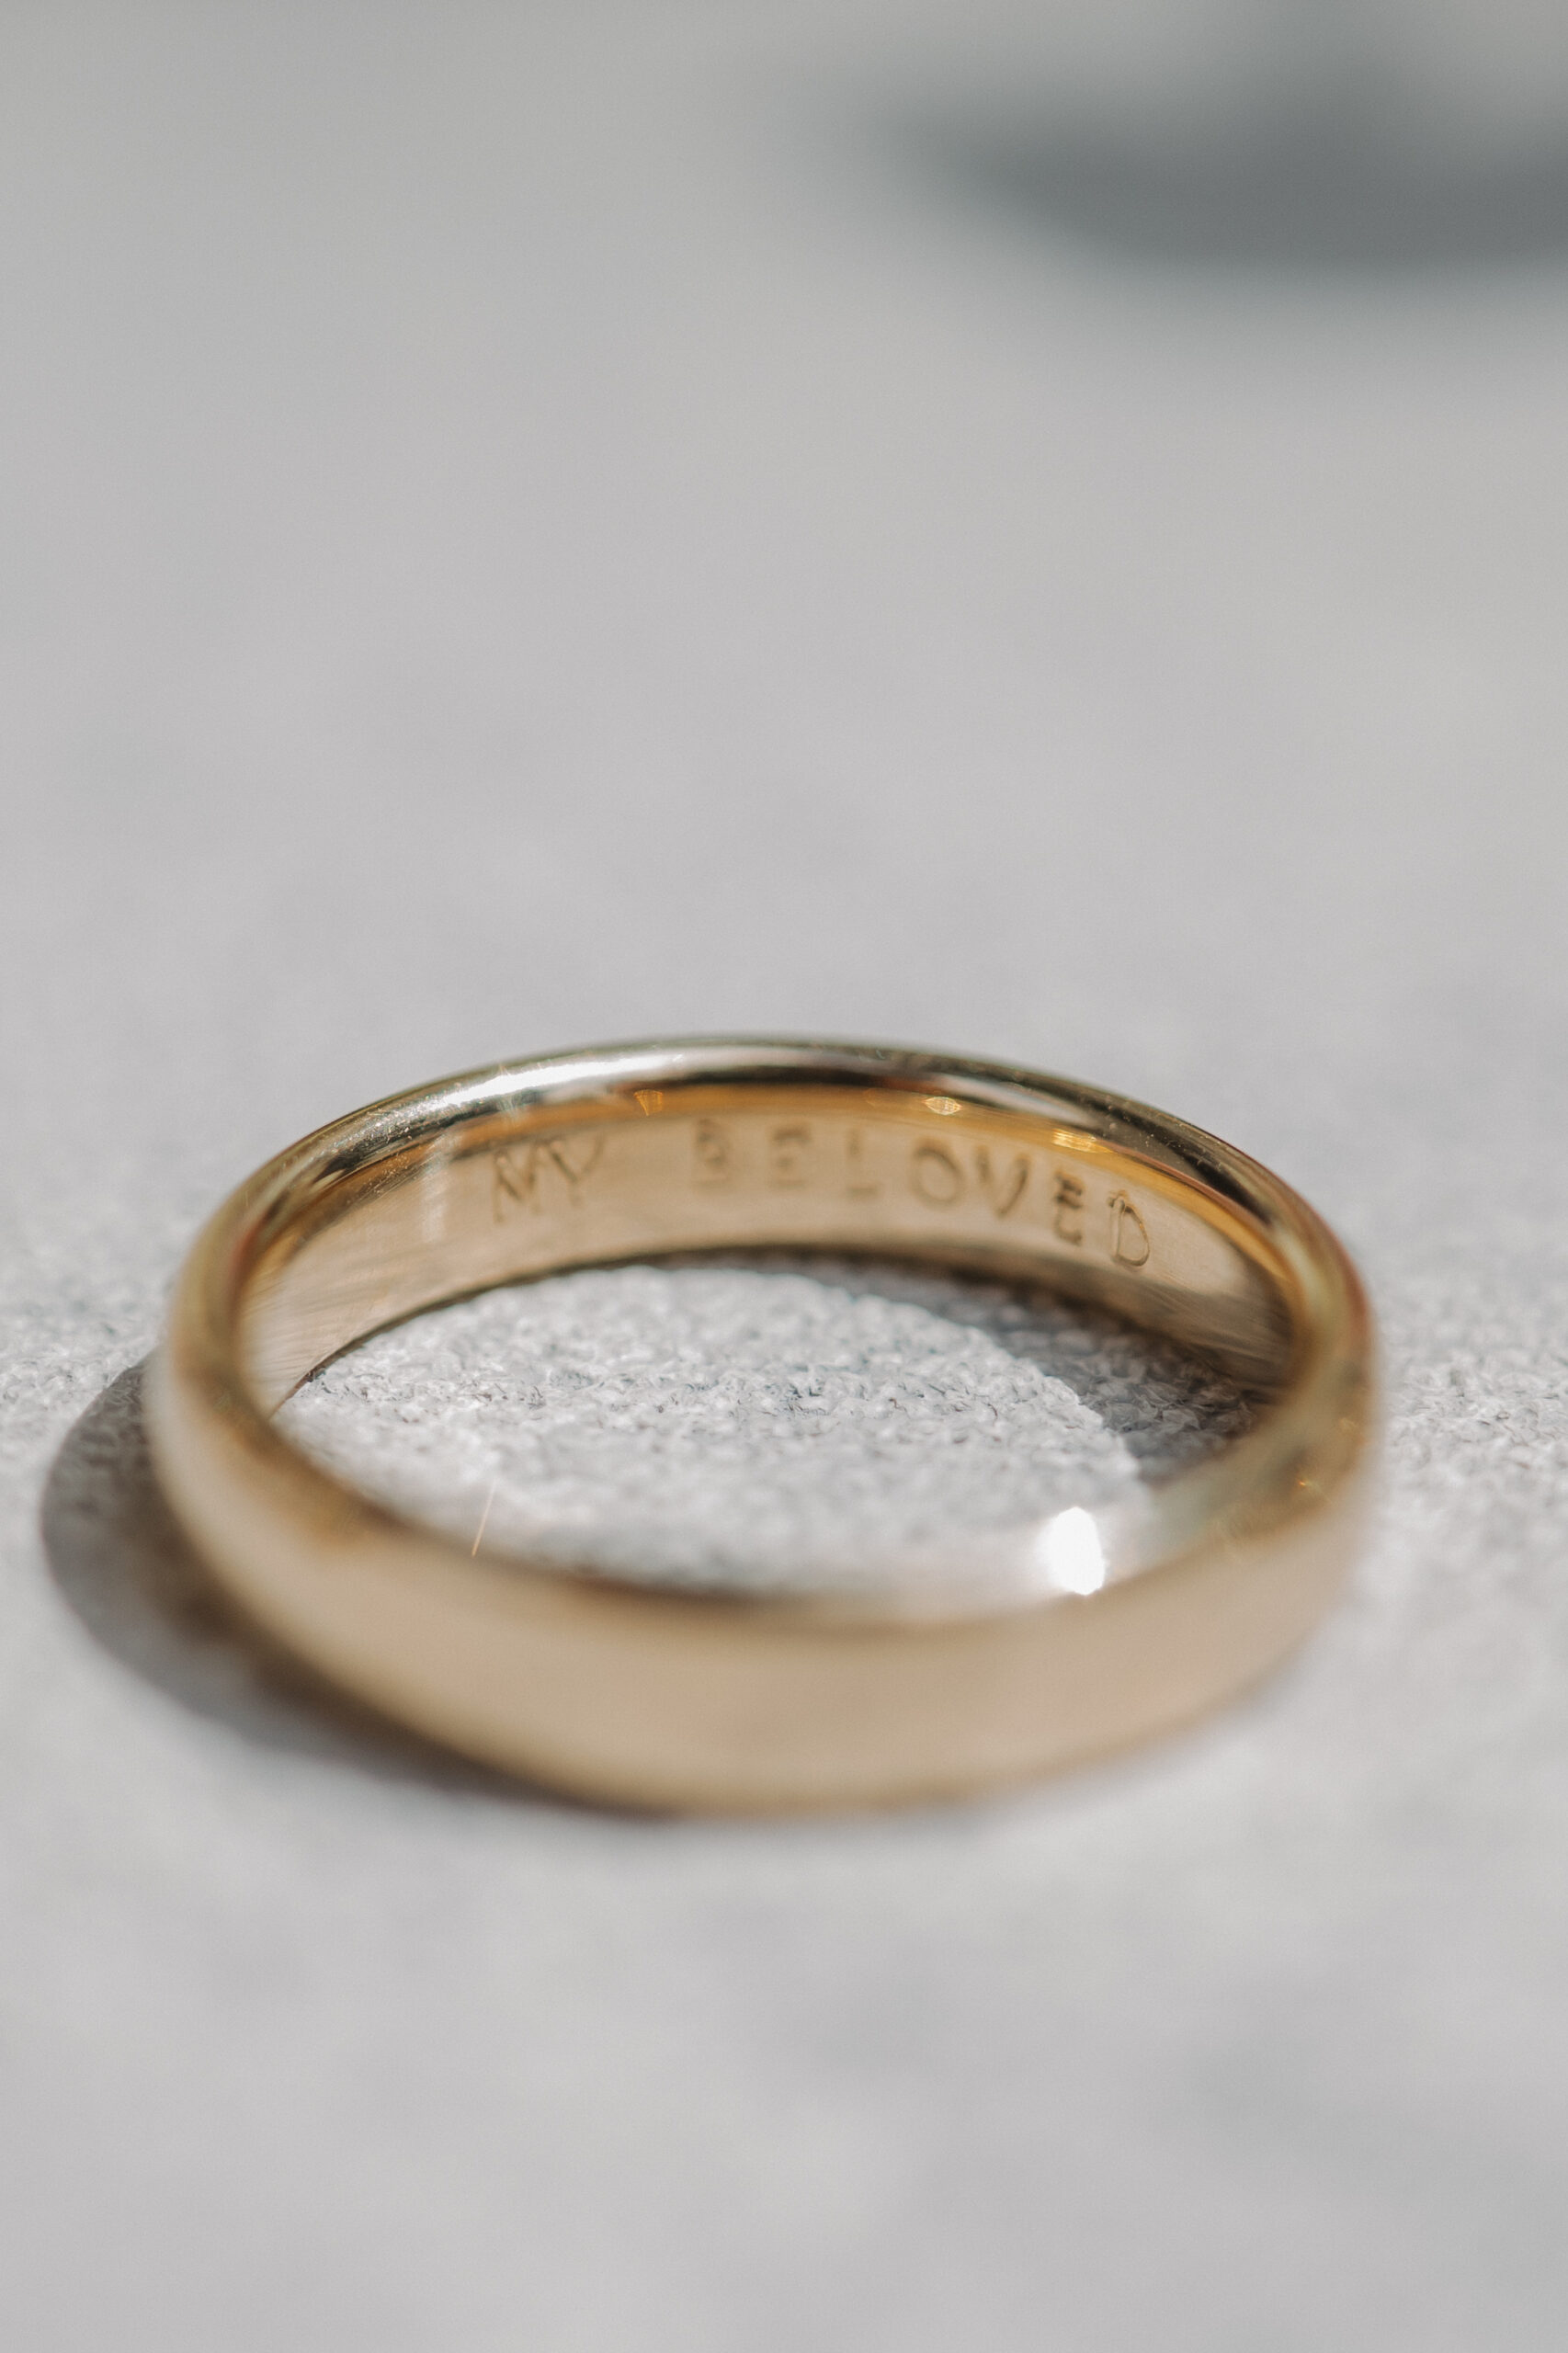 The Groom's Wedding band, inscribed with "My Beloved" 